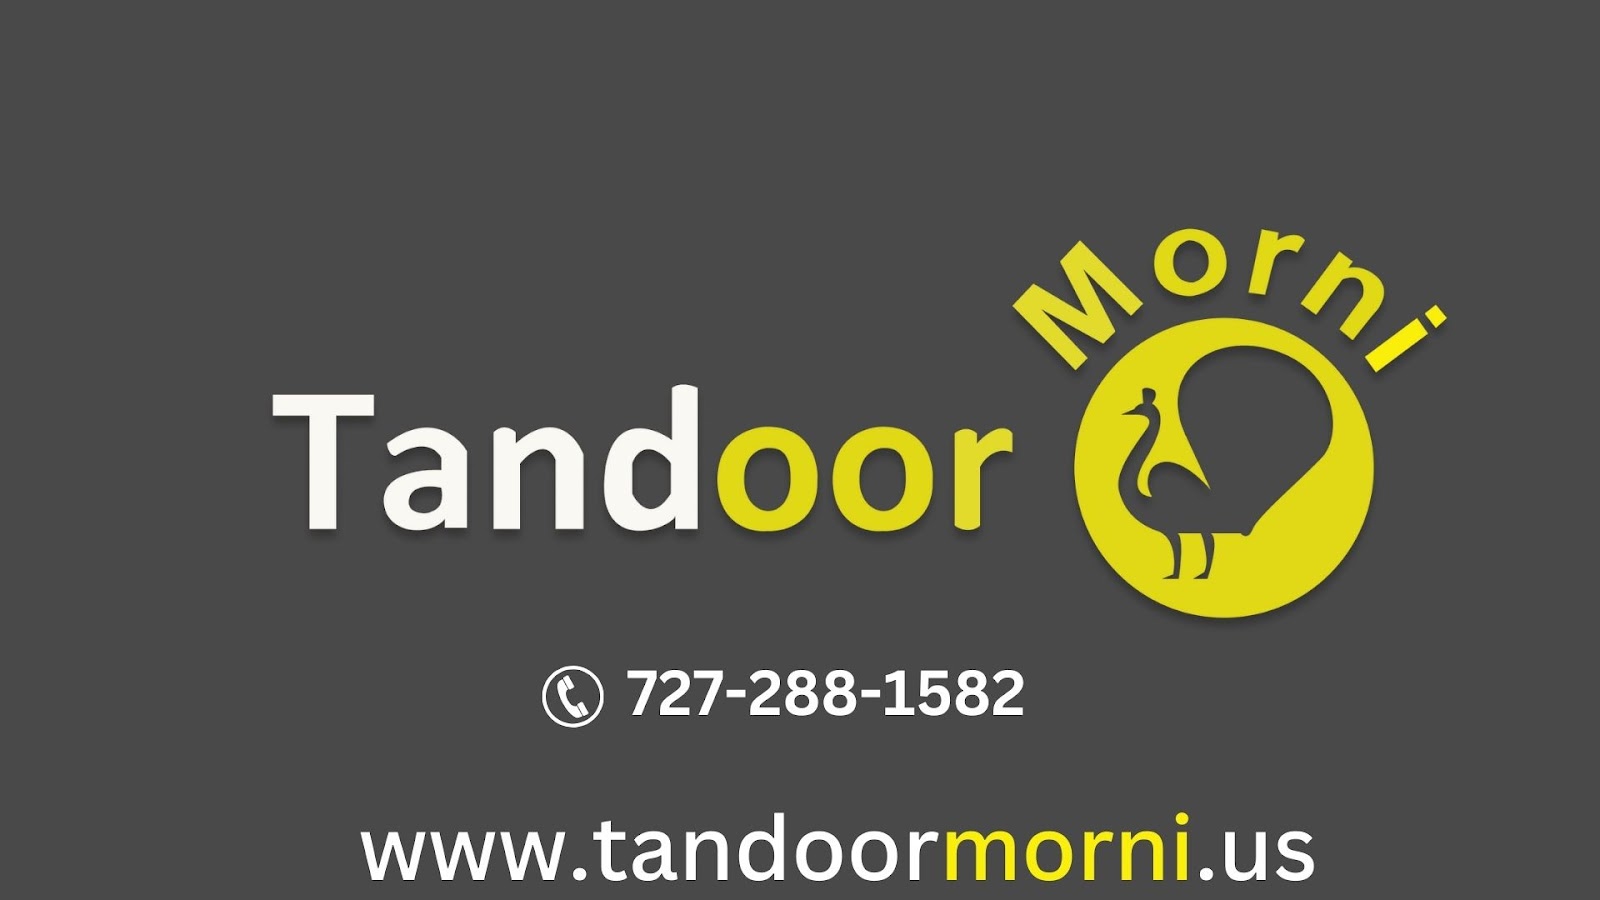 residents of California What are you waiting for? Tandoor is currently available for purchase from Morni Tandoor in California.